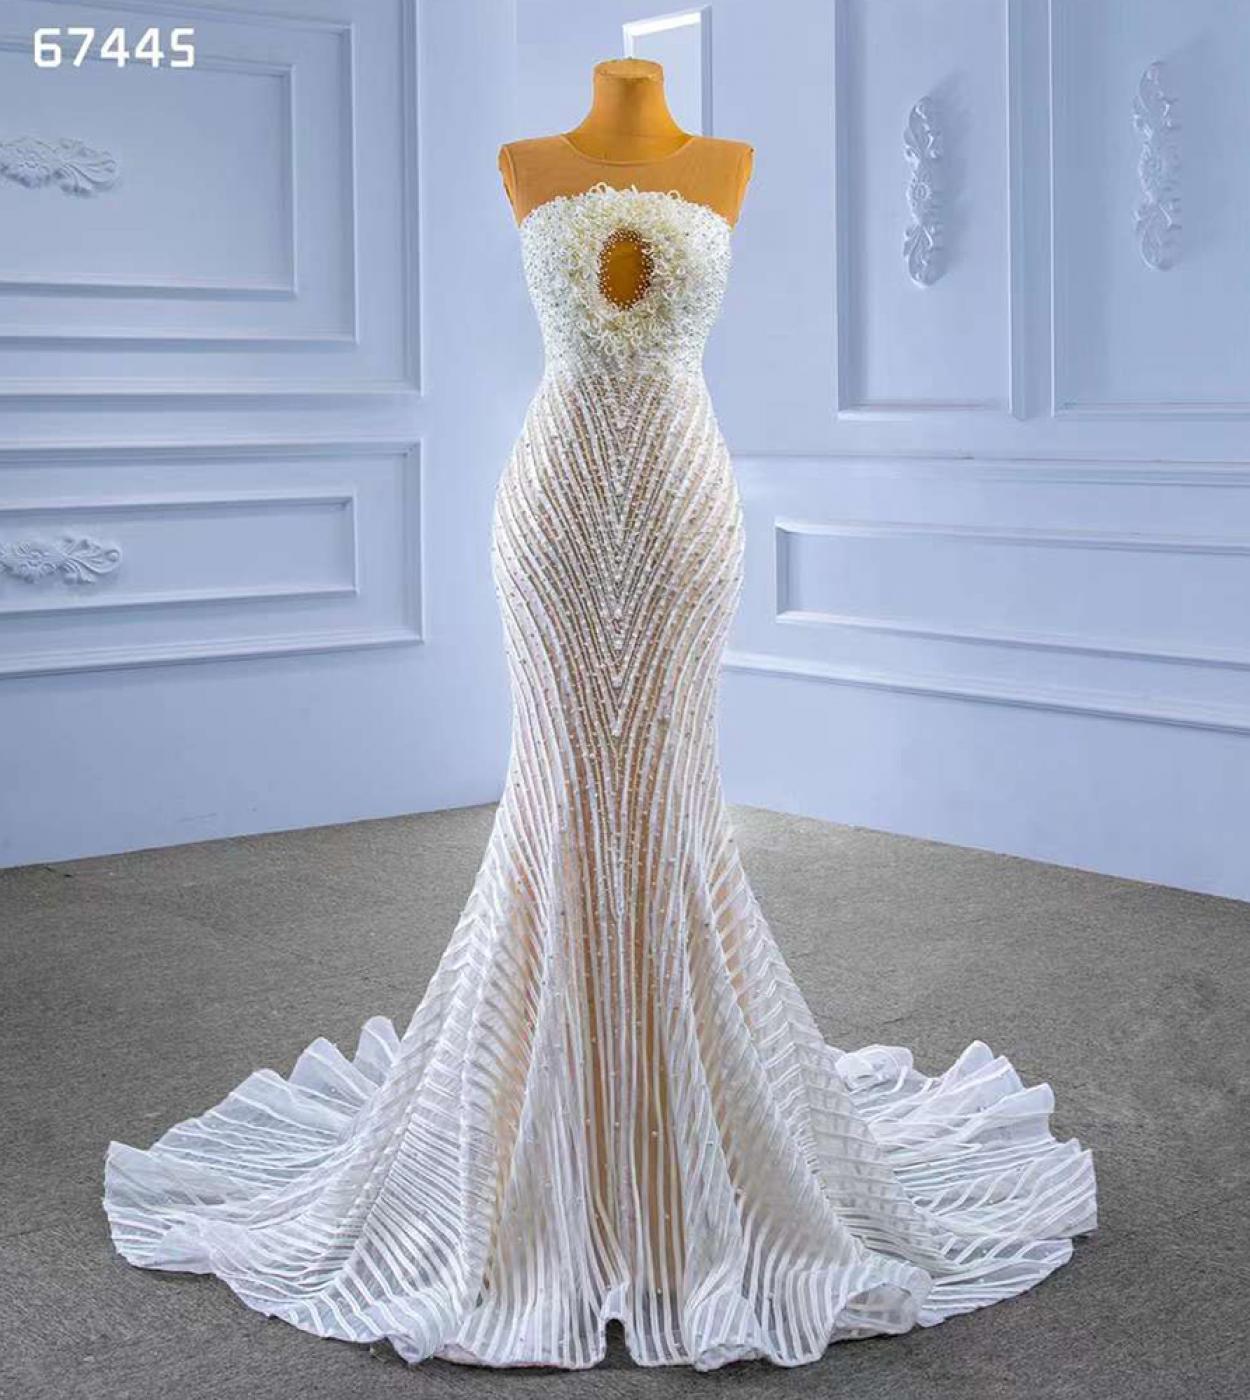 Serene Hill White Nude Elegant Mermaid High End Custom Made Pearls Beaded Lace Up Bride Evening Gown Wedding Dress 2022 